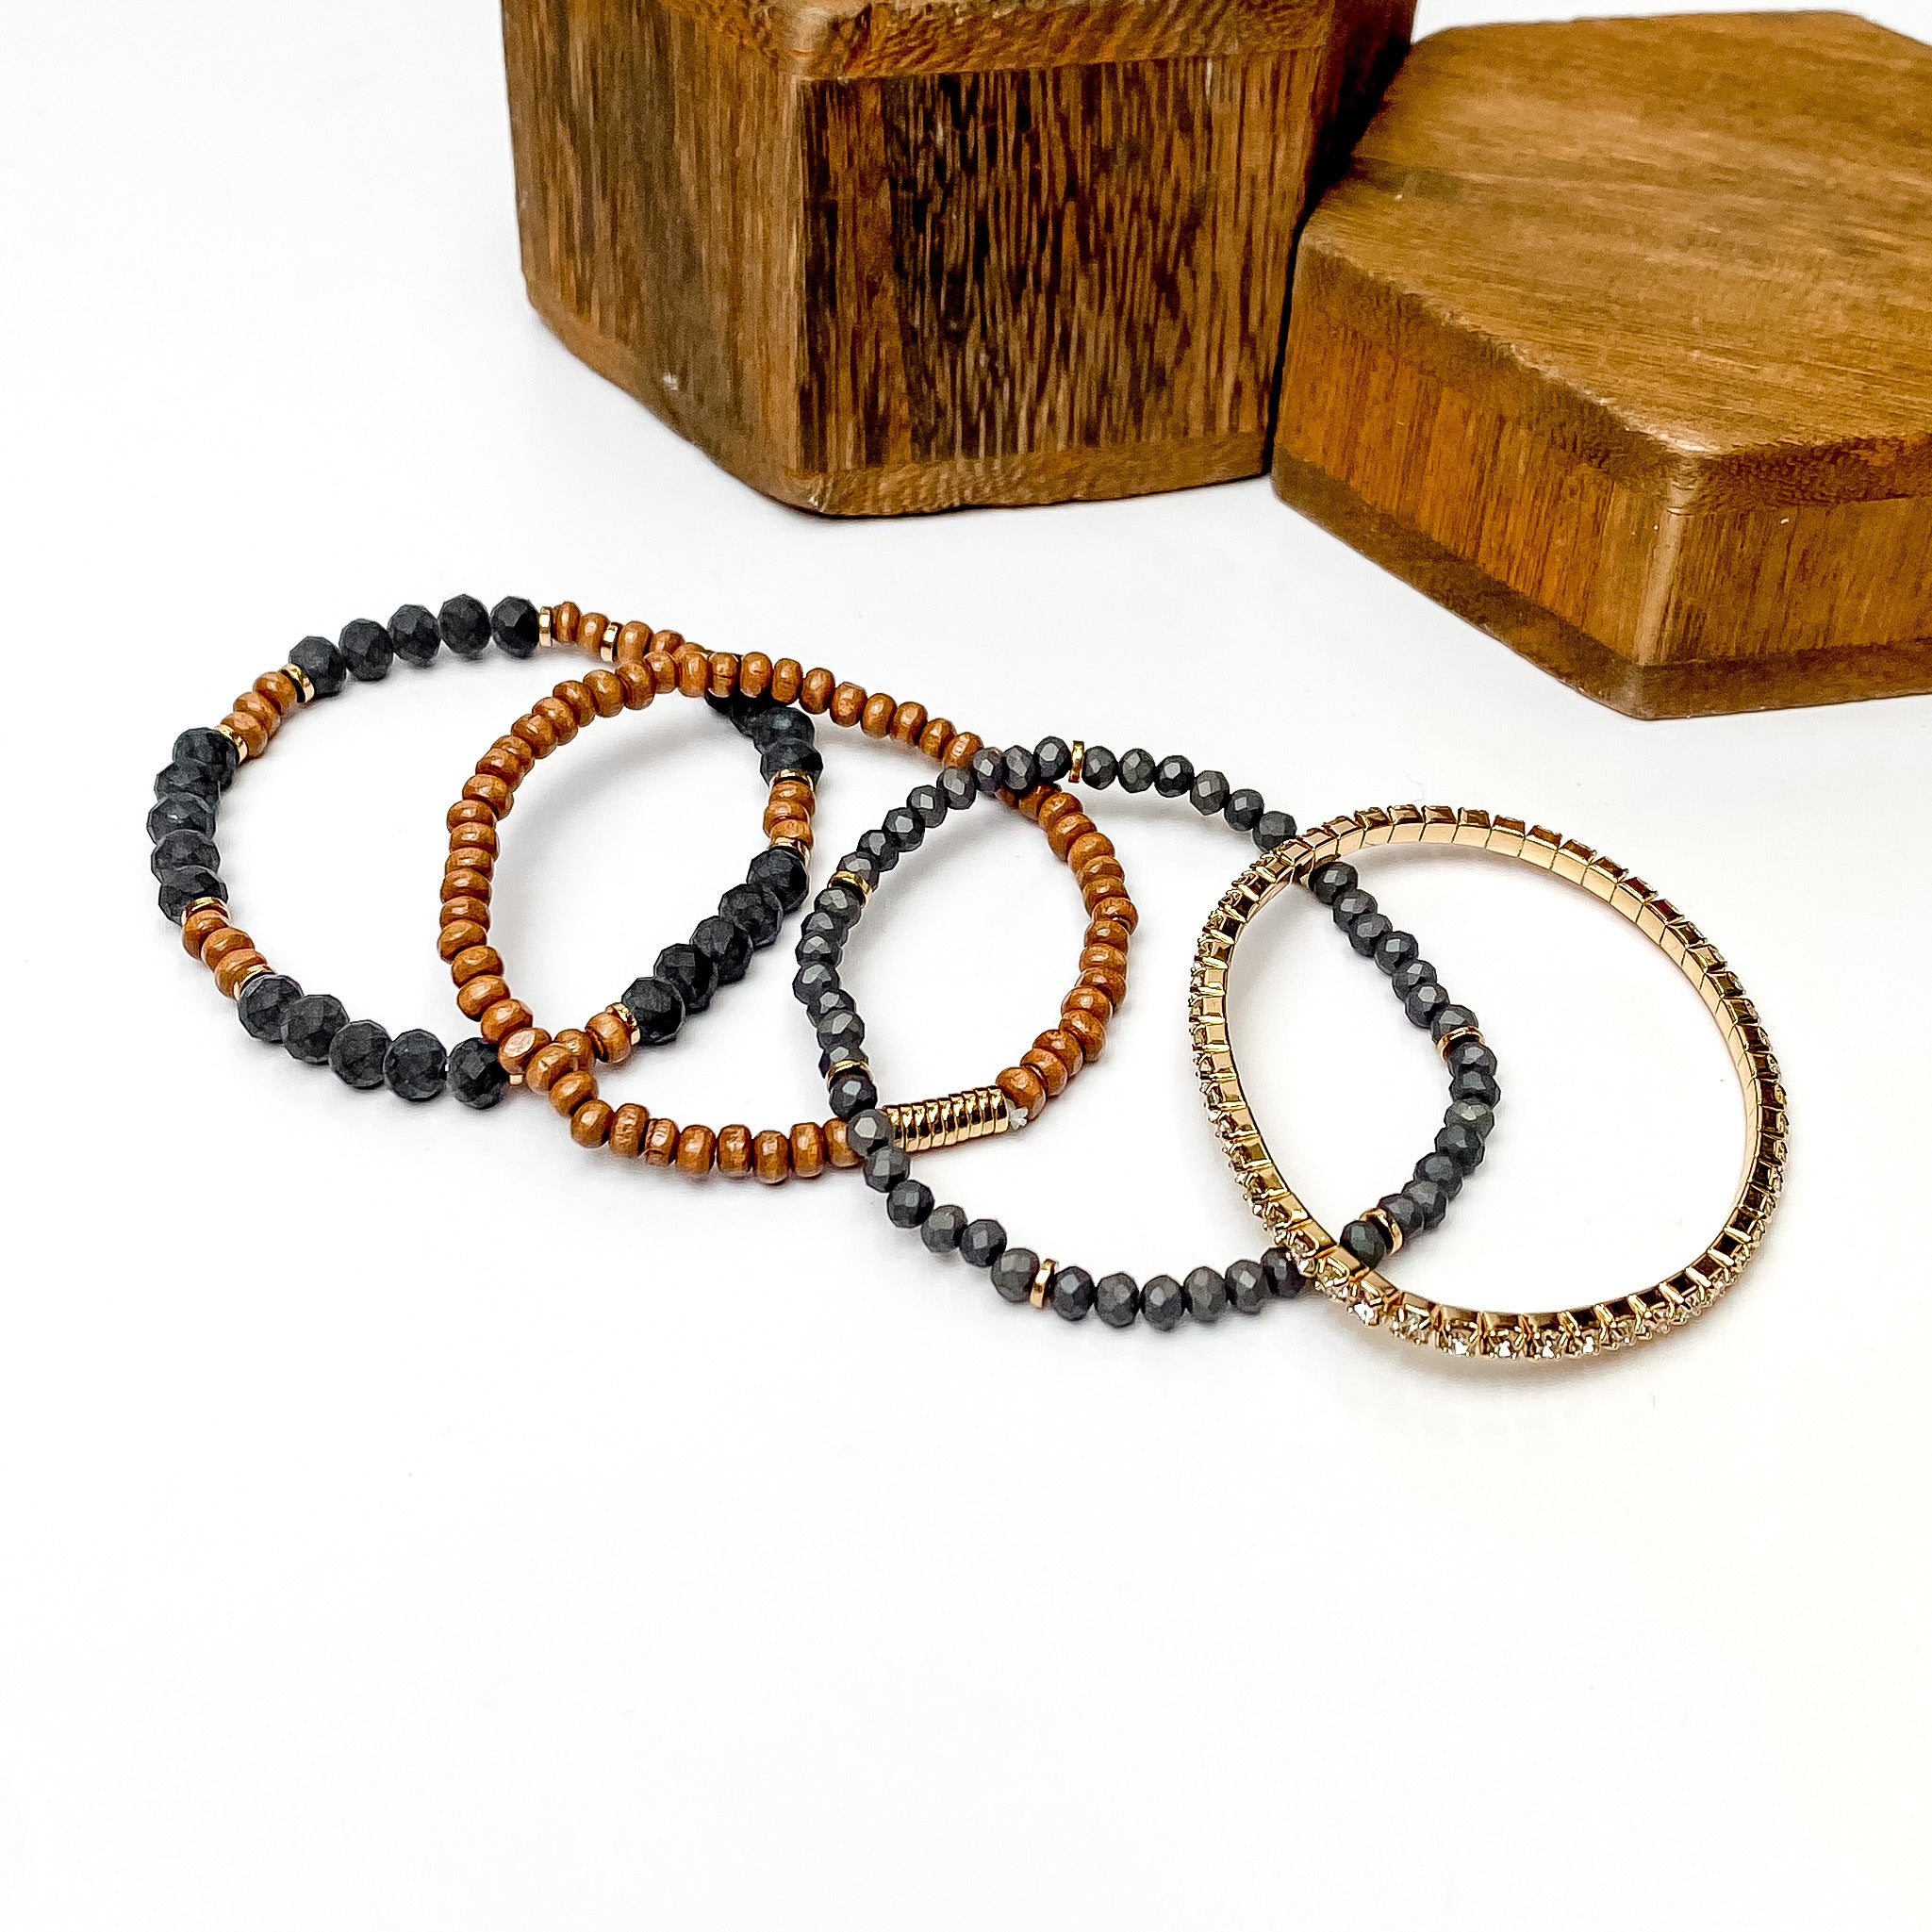 Set of four bracelets pictured laying one on top of the other. The bracelet at the top includes black and brown beads, the second has brown beads and gold disc beads, the third includes black beads with gold disk spacers, and the last bracelet is a full crystal band with a gold setting. These bracelets are pictured on a white background with brown blocks in the top right corner. 